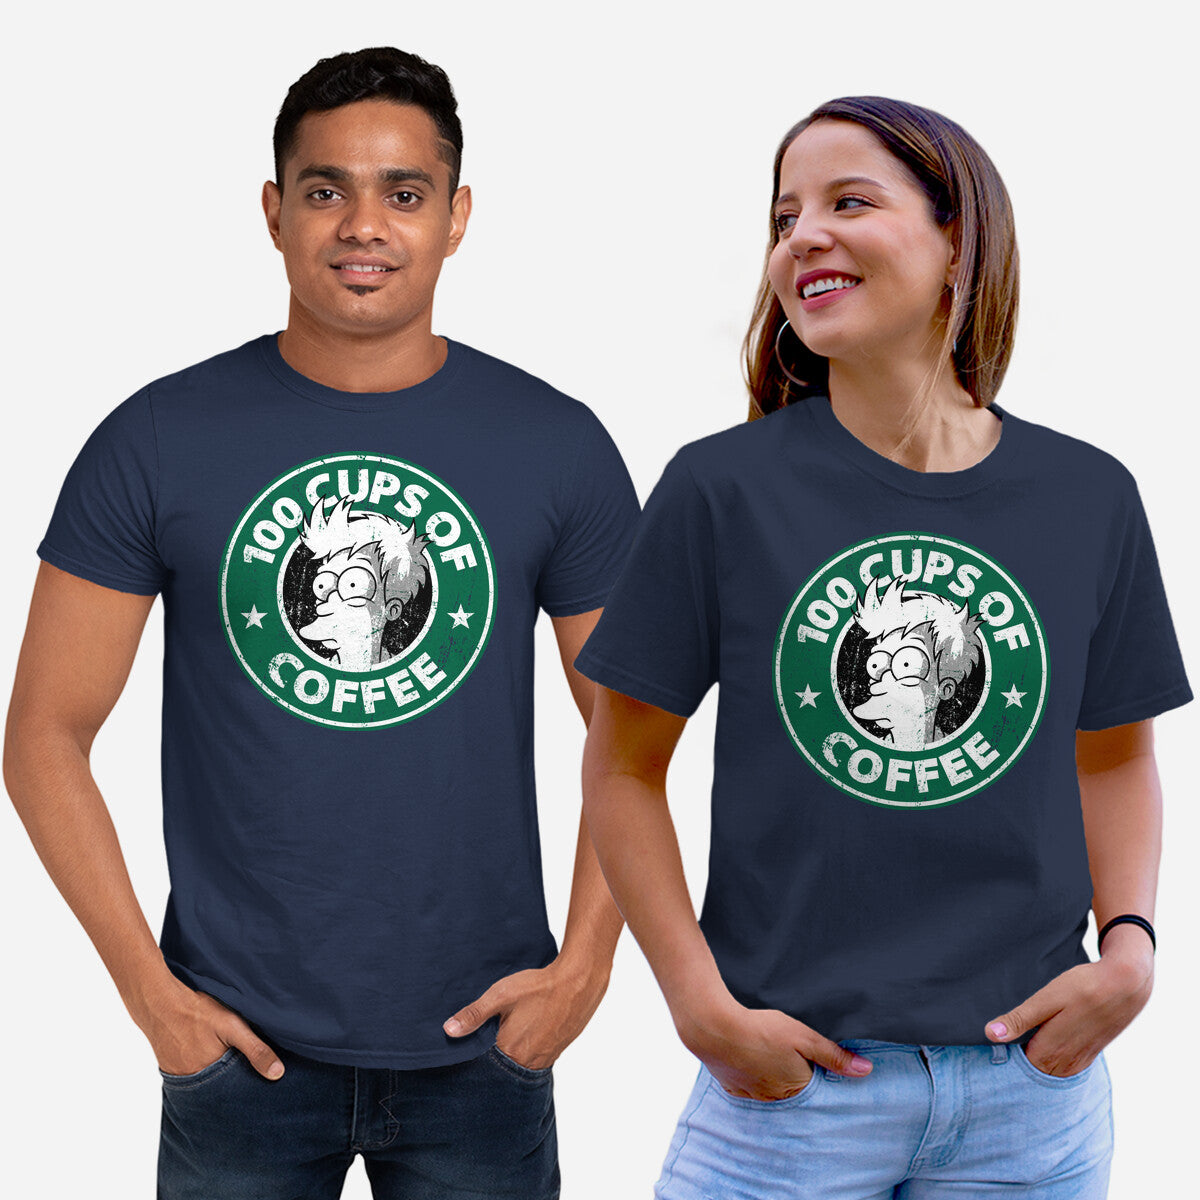 100 Cups of Coffee - T-Shirt